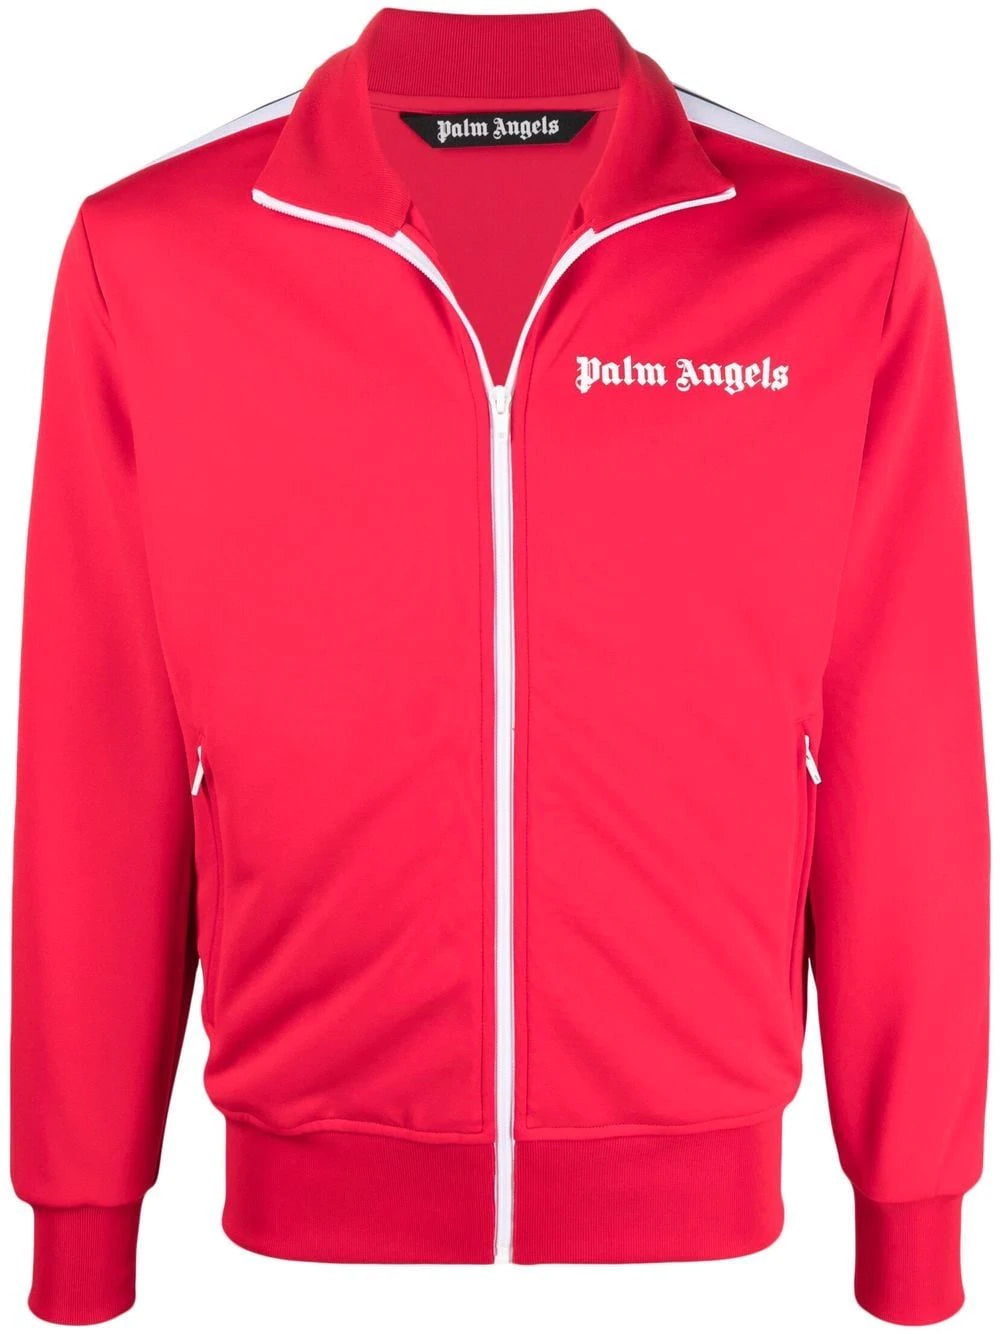 PALM ANGELS Classic Track Jacket Red/White